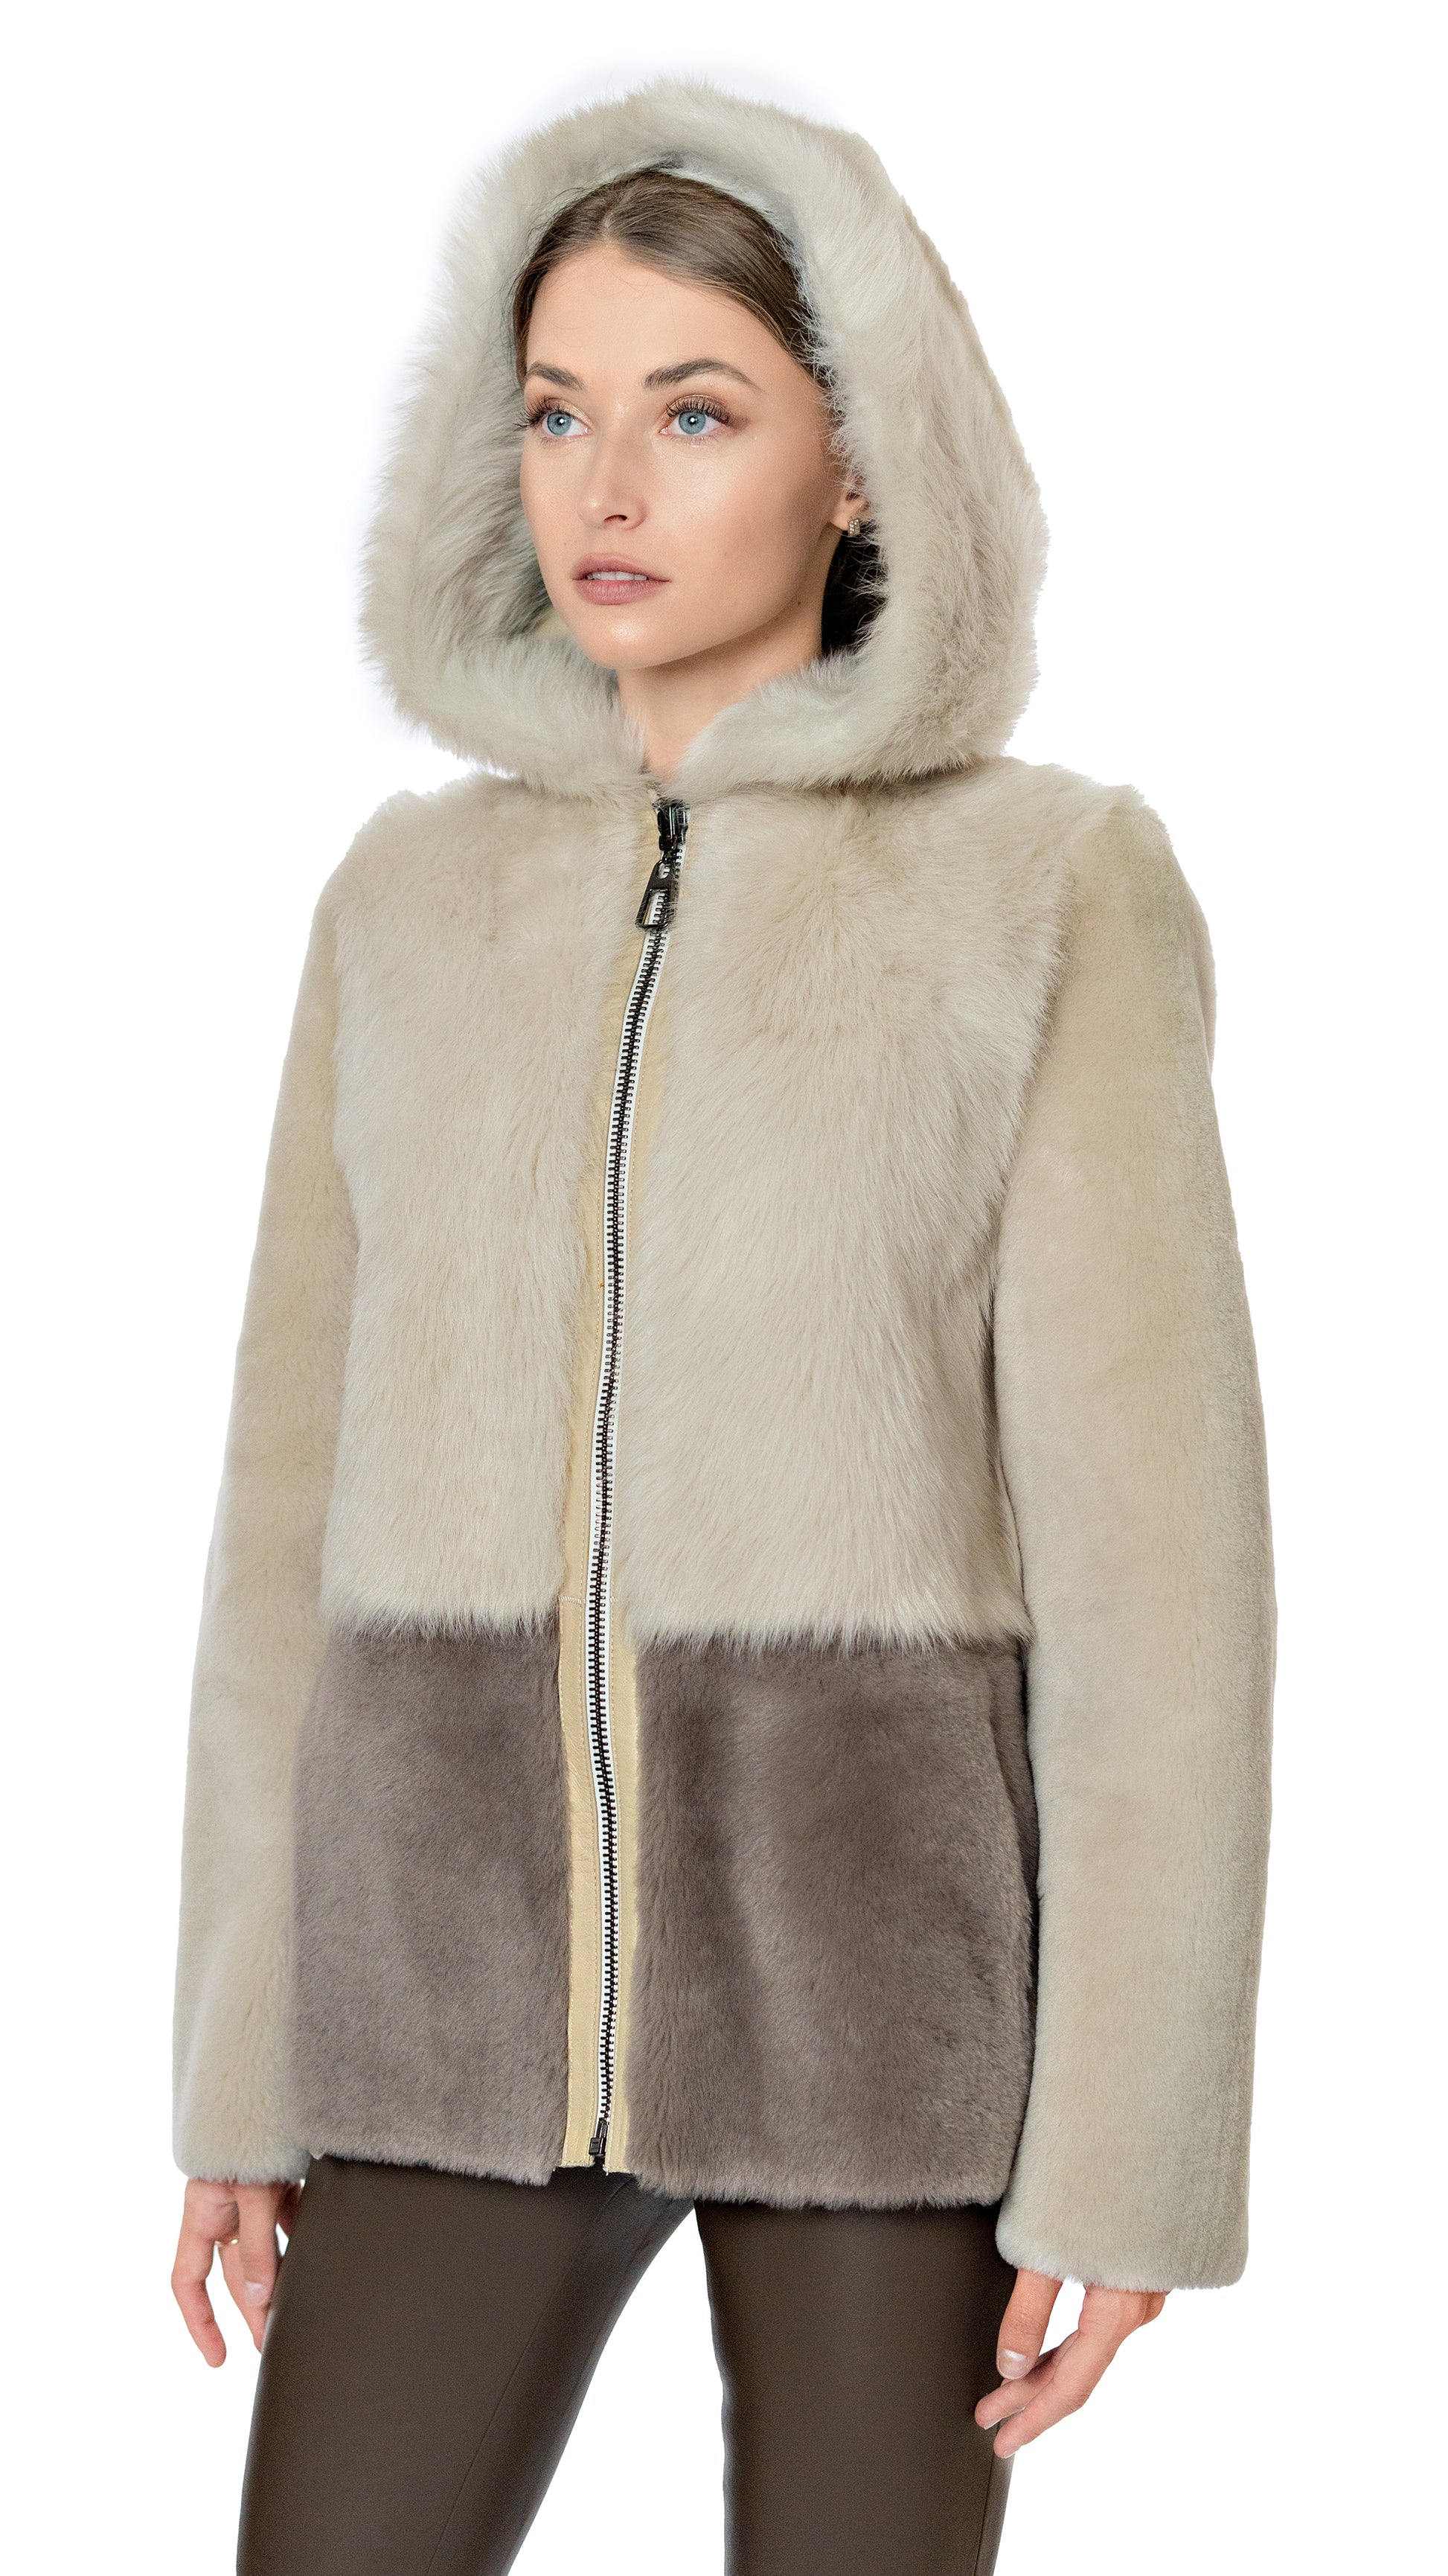 Rizal shearling coat with hood in ivory and grey